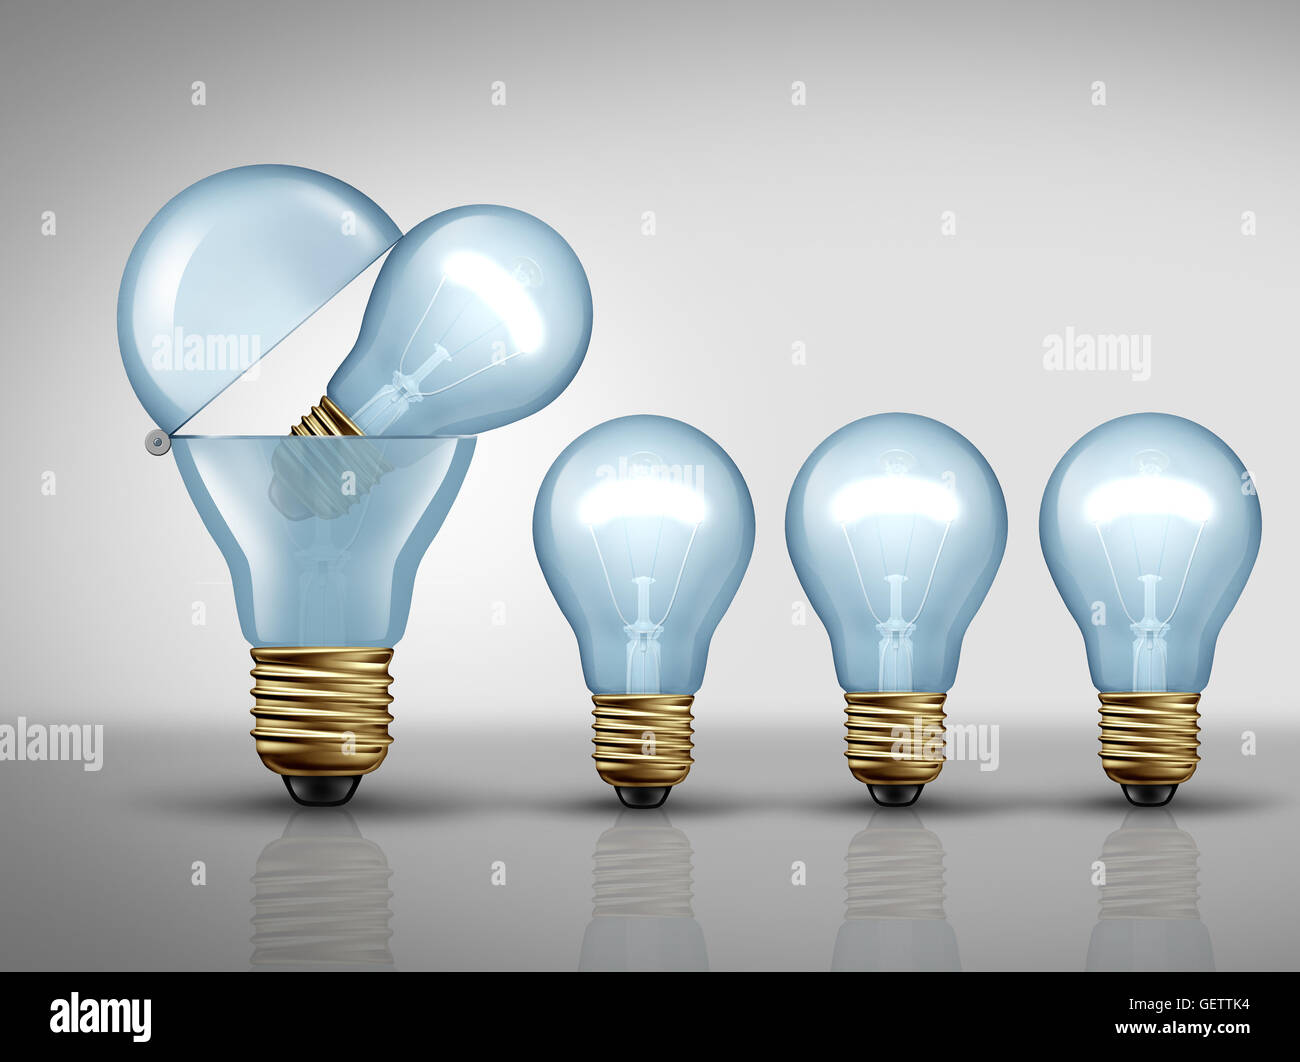 Productivity concept and fertile imagination business symbol as an open light bulb or lightbulb creating smaller lights as a prolific idea creation metaphor or clever manufacturing strategy icon as a 3D illustration. Stock Photo